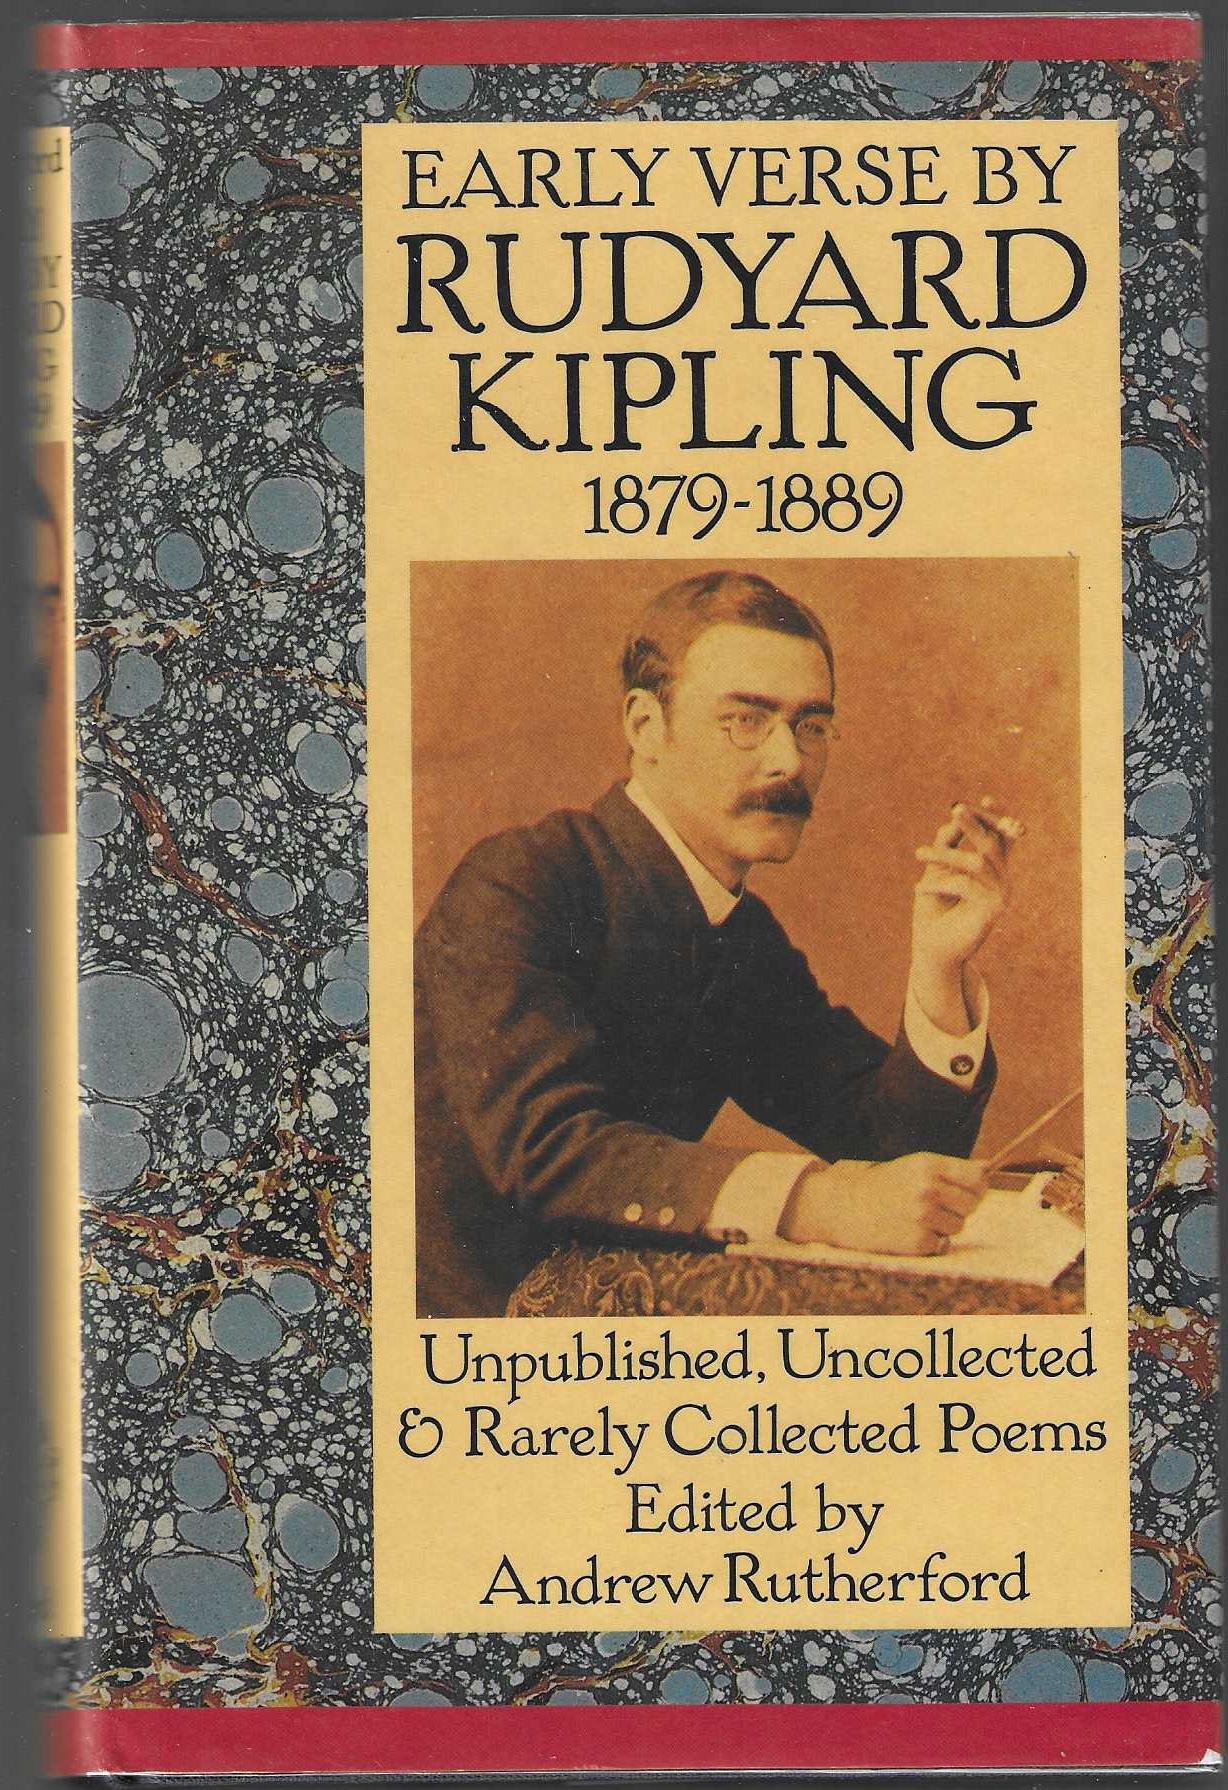 EARLY VERSE BY RUDYARD KIPLING 1879-1889, Unpublished, Uncollected, and ...